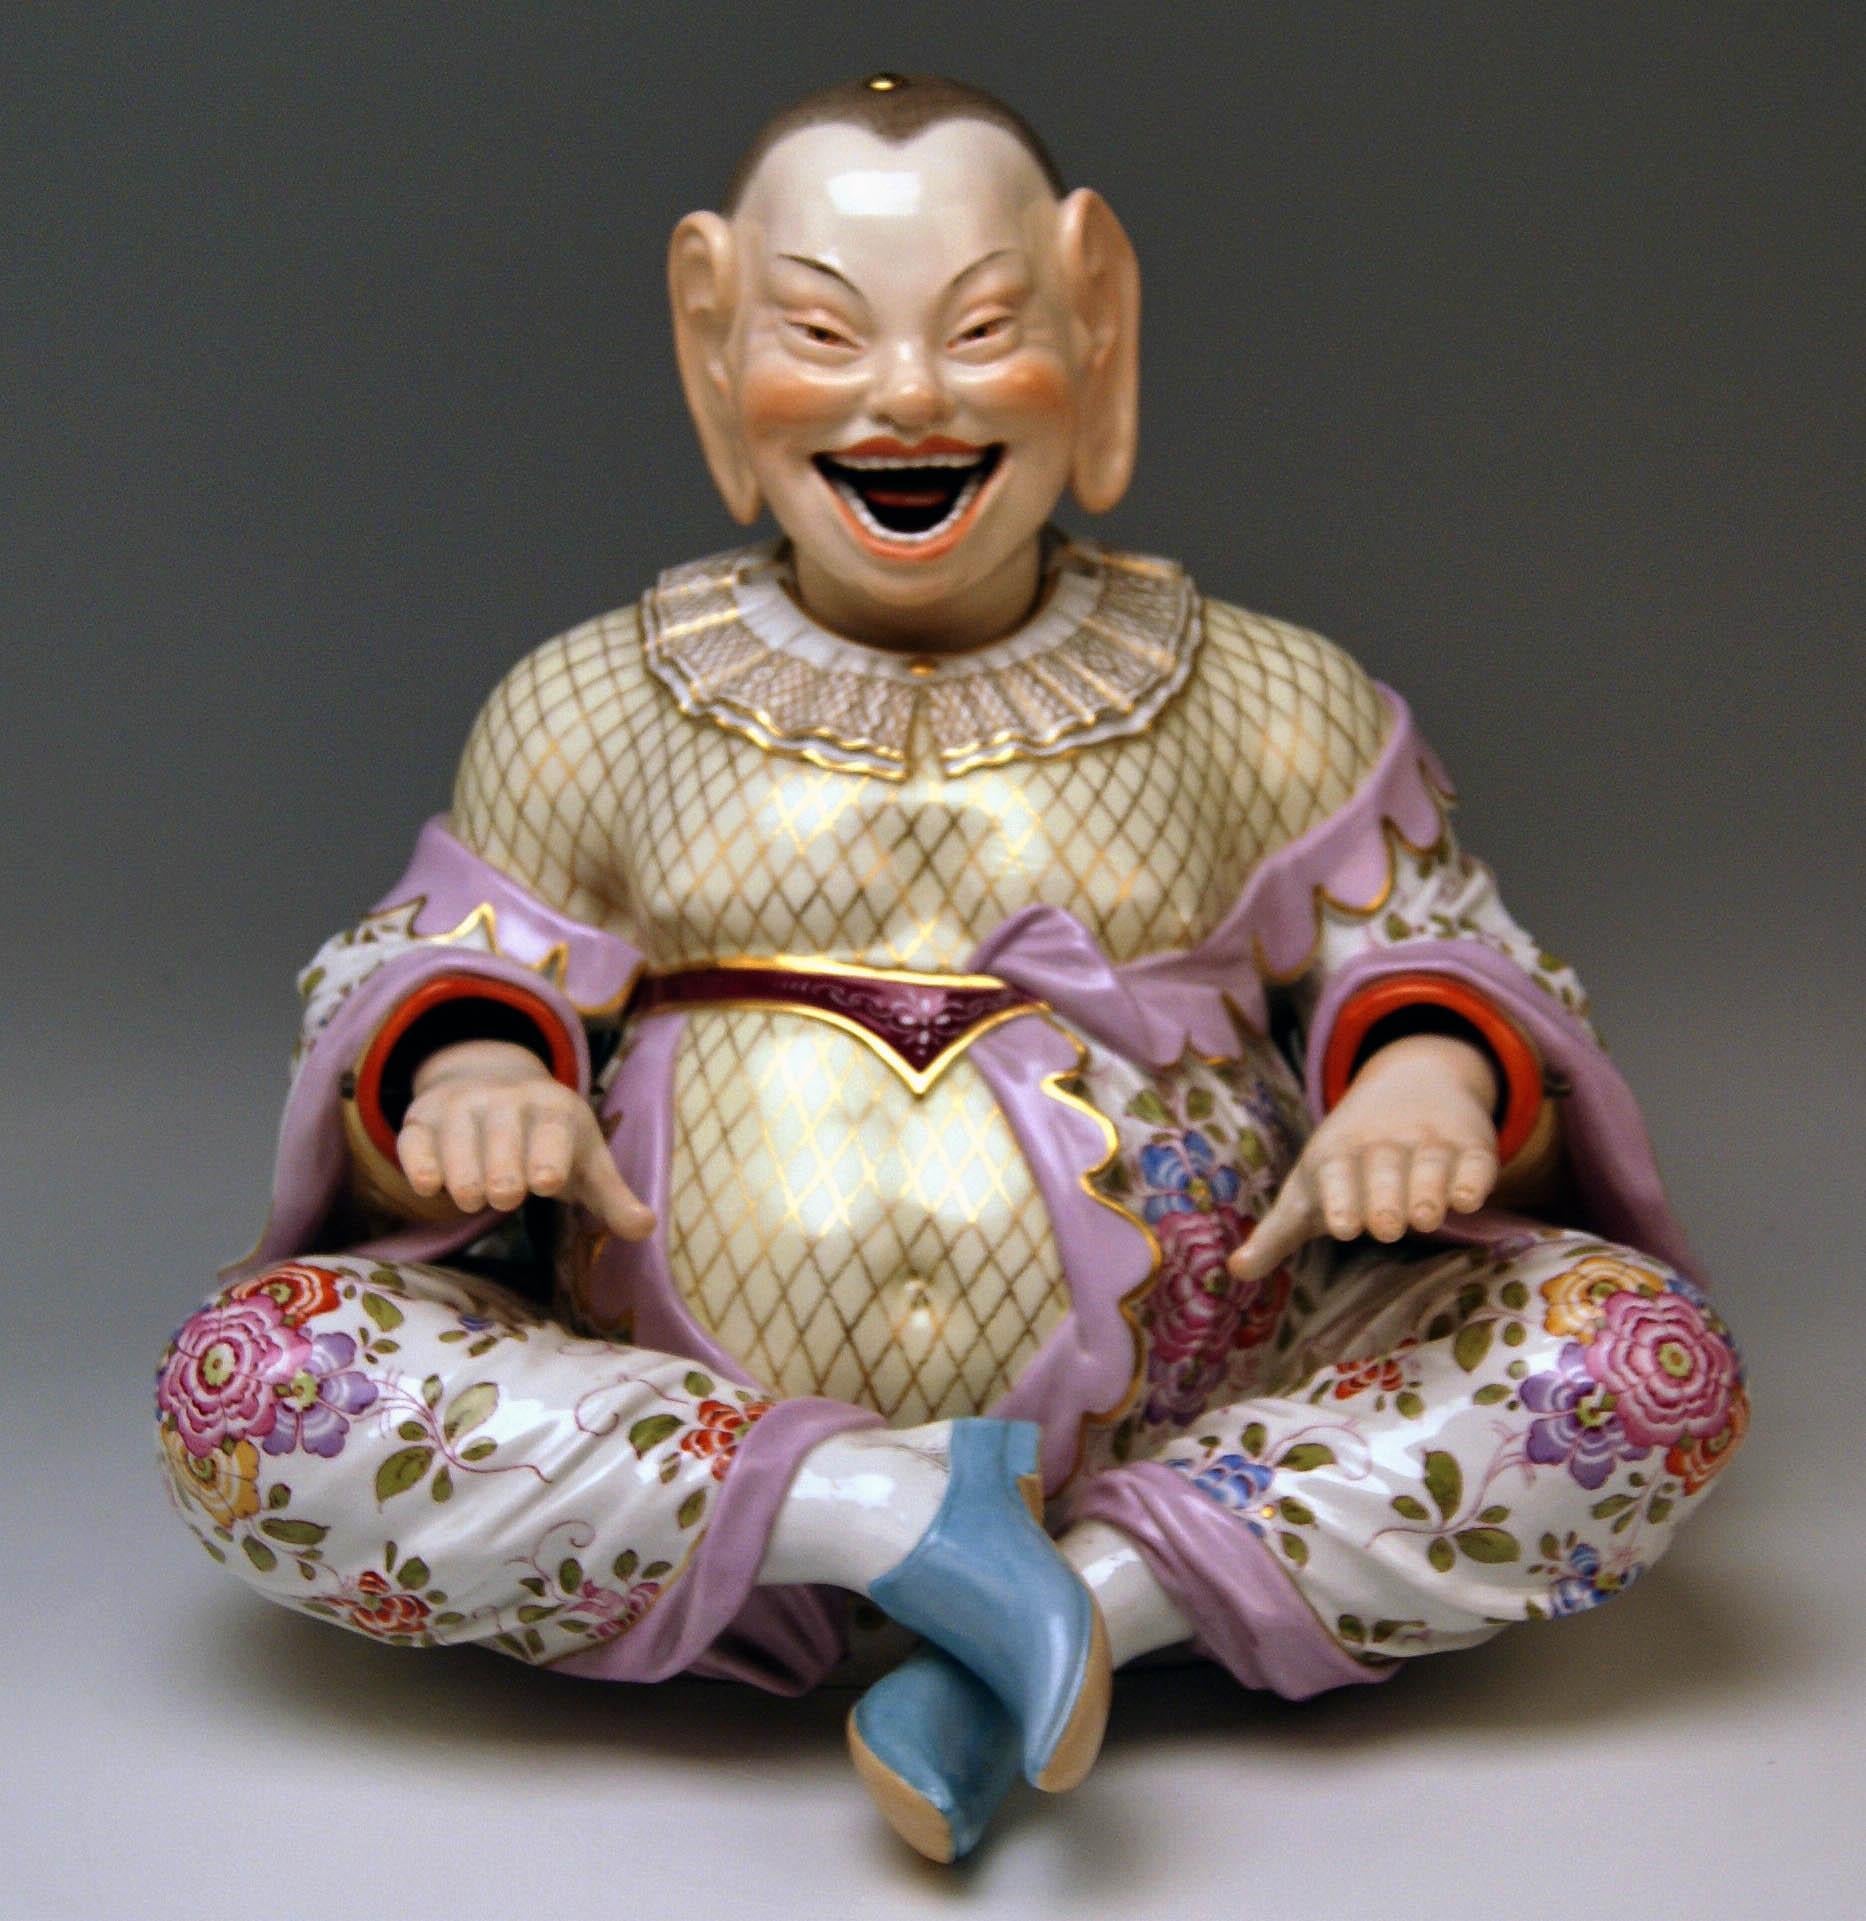 Meissen most remarkable items: Two Buddha figurines (male and female)
Attention: The Buddha figurines have movable hands, head and tongue.

Measures / Dimensions:
Height 12.59 inches / 32.0 cm 
Width 12.79 inches / 32.5 cm 
Depth 12.59 inches